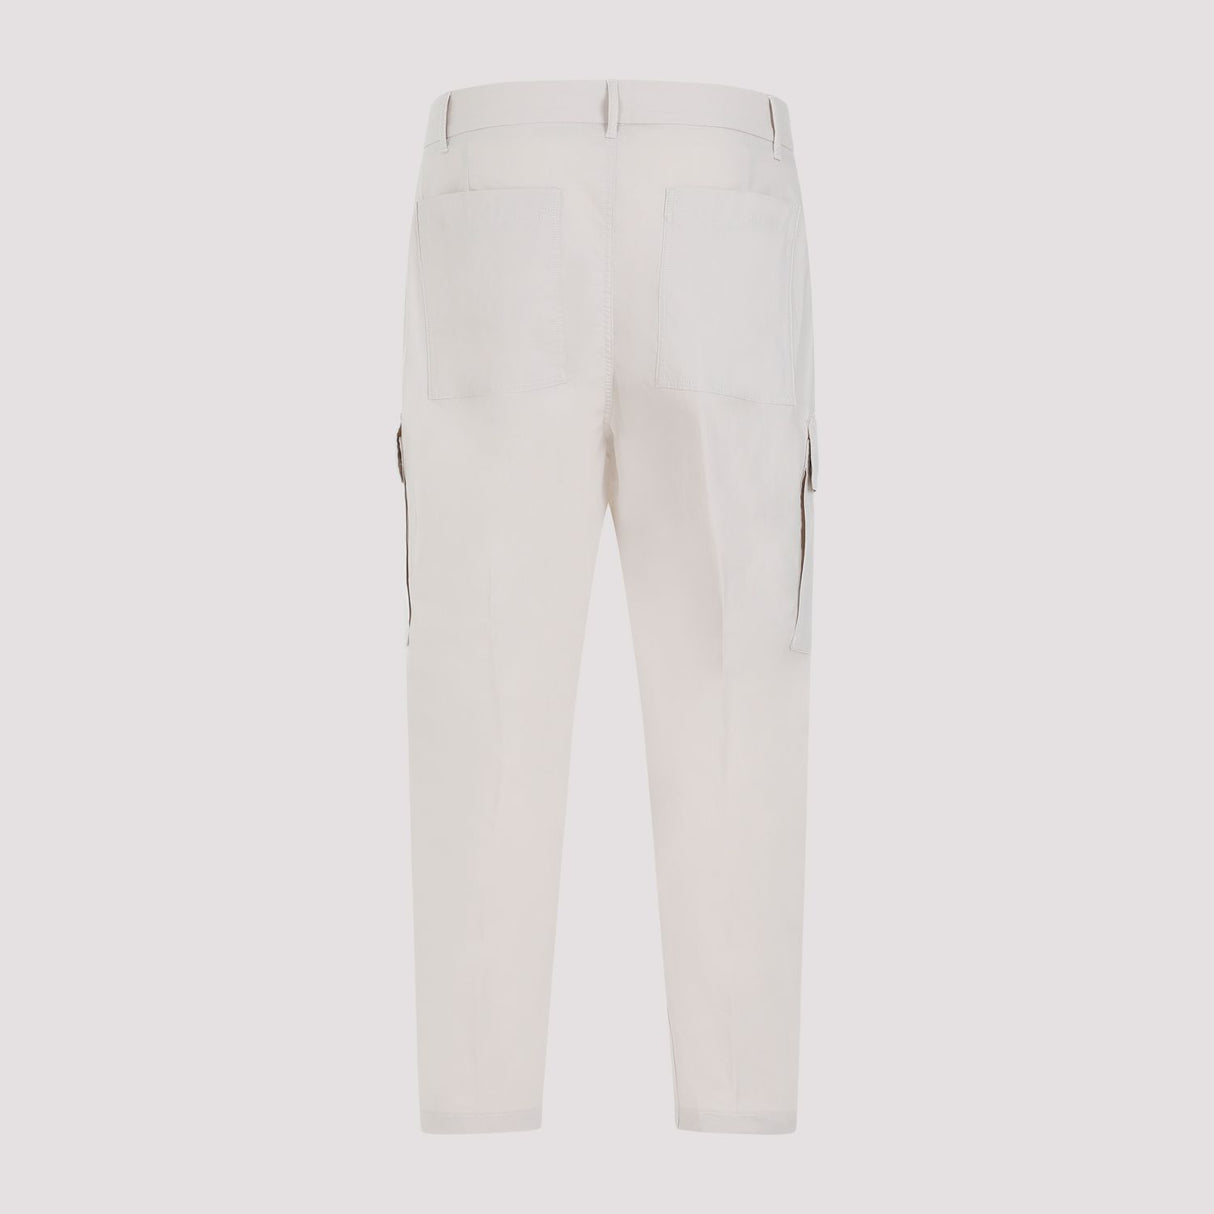 ETRO Slim Fit Cargo Pants with Stretch Fabric for Men in Neutral Color